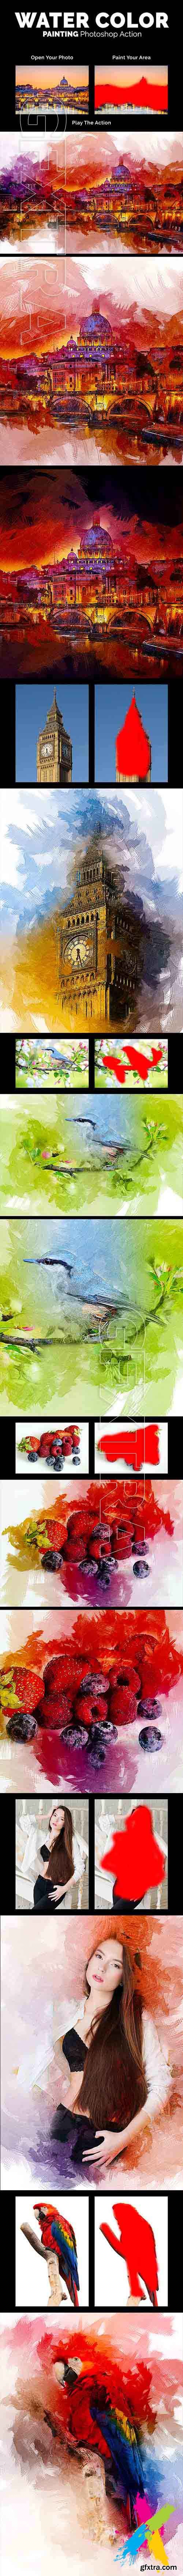 GraphicRiver - Water Color Painting Photoshop Action 20831259